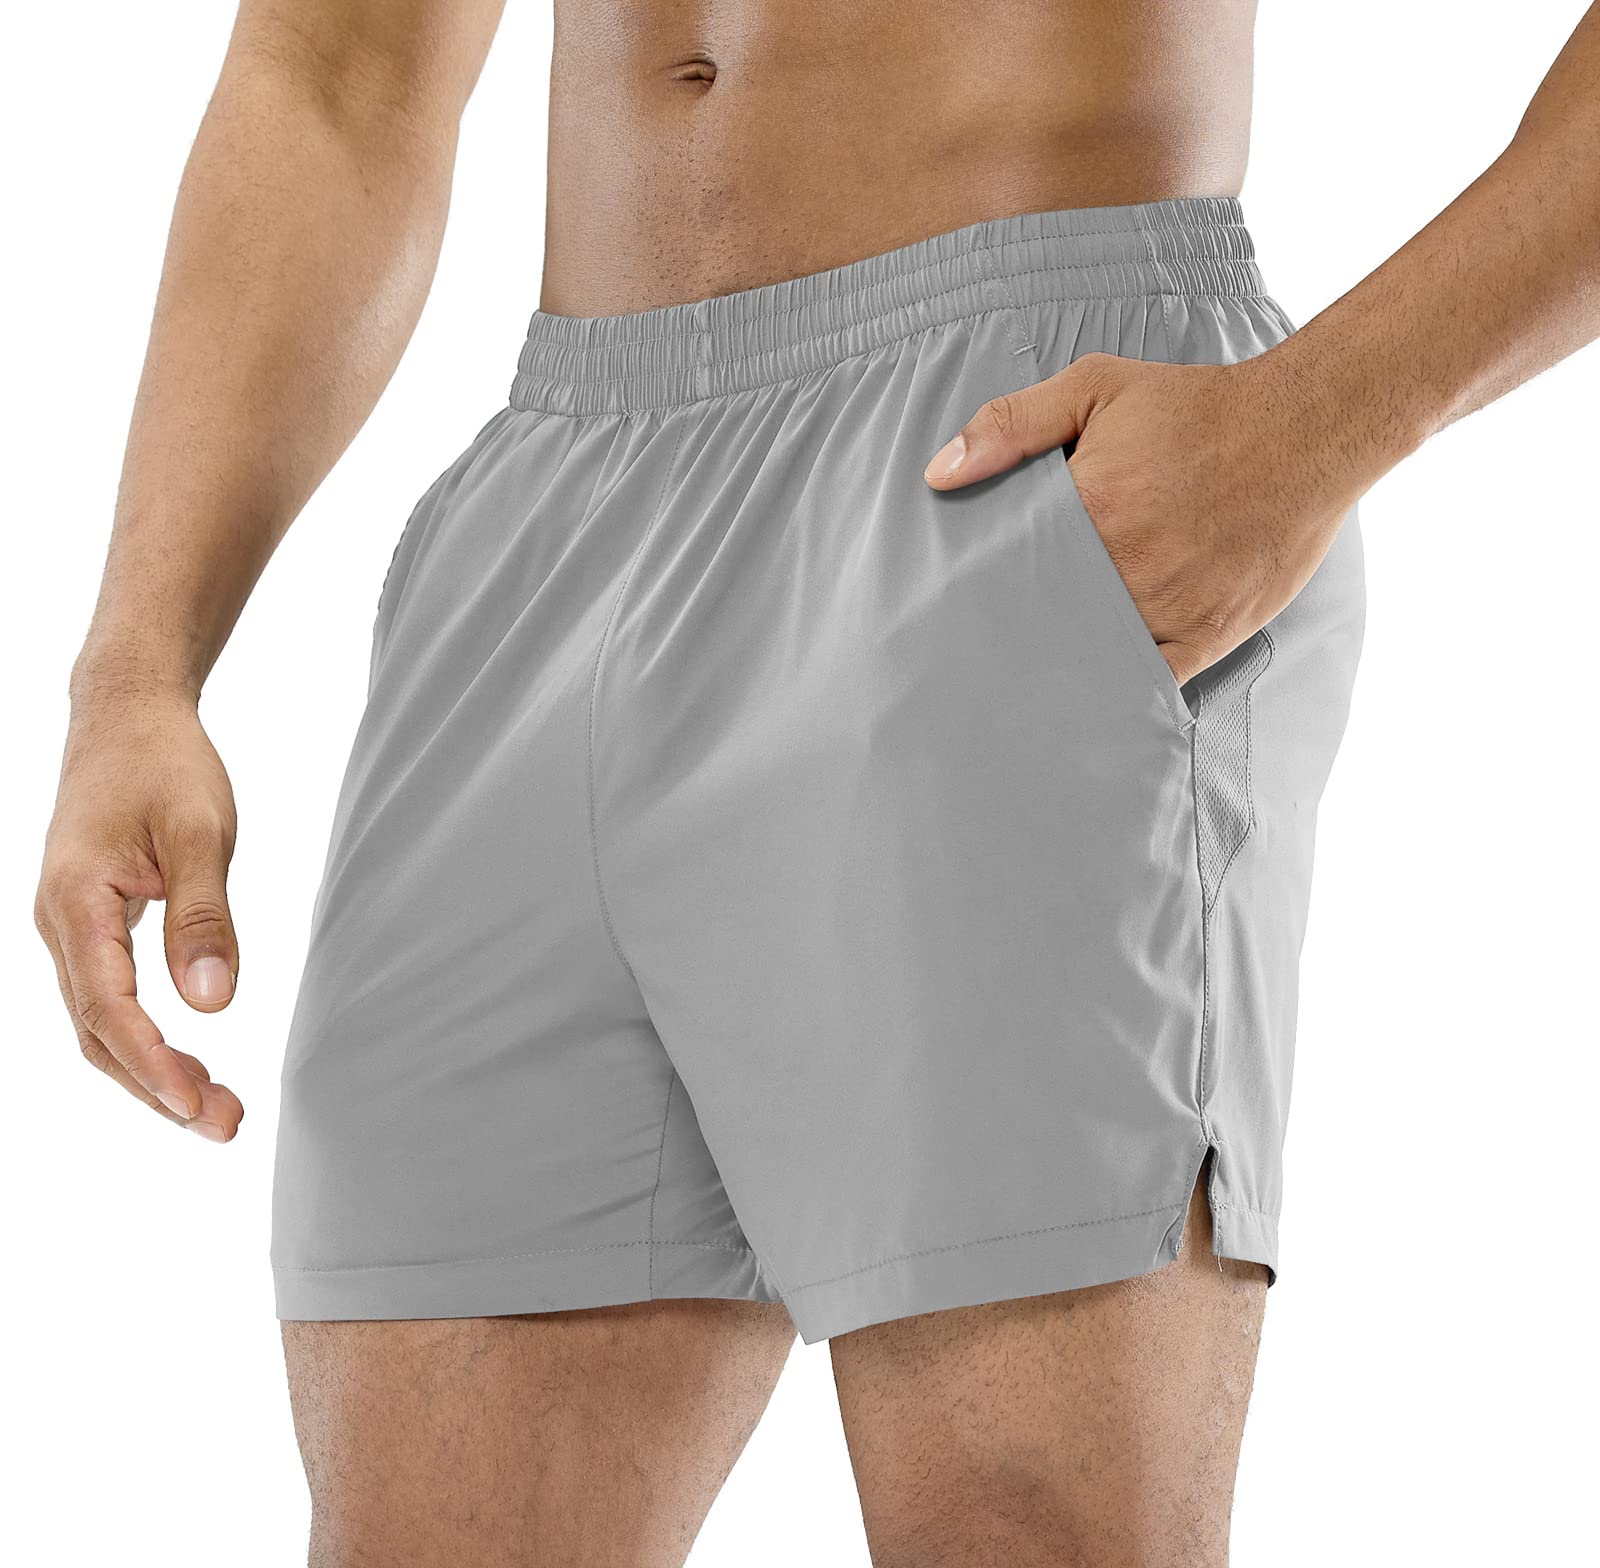 MIER Men's Workout Running Shorts Lightweight Active 5 Inches Shorts with  Pockets, Quick Dry, Breathable Light Grey Without Zipper Medium